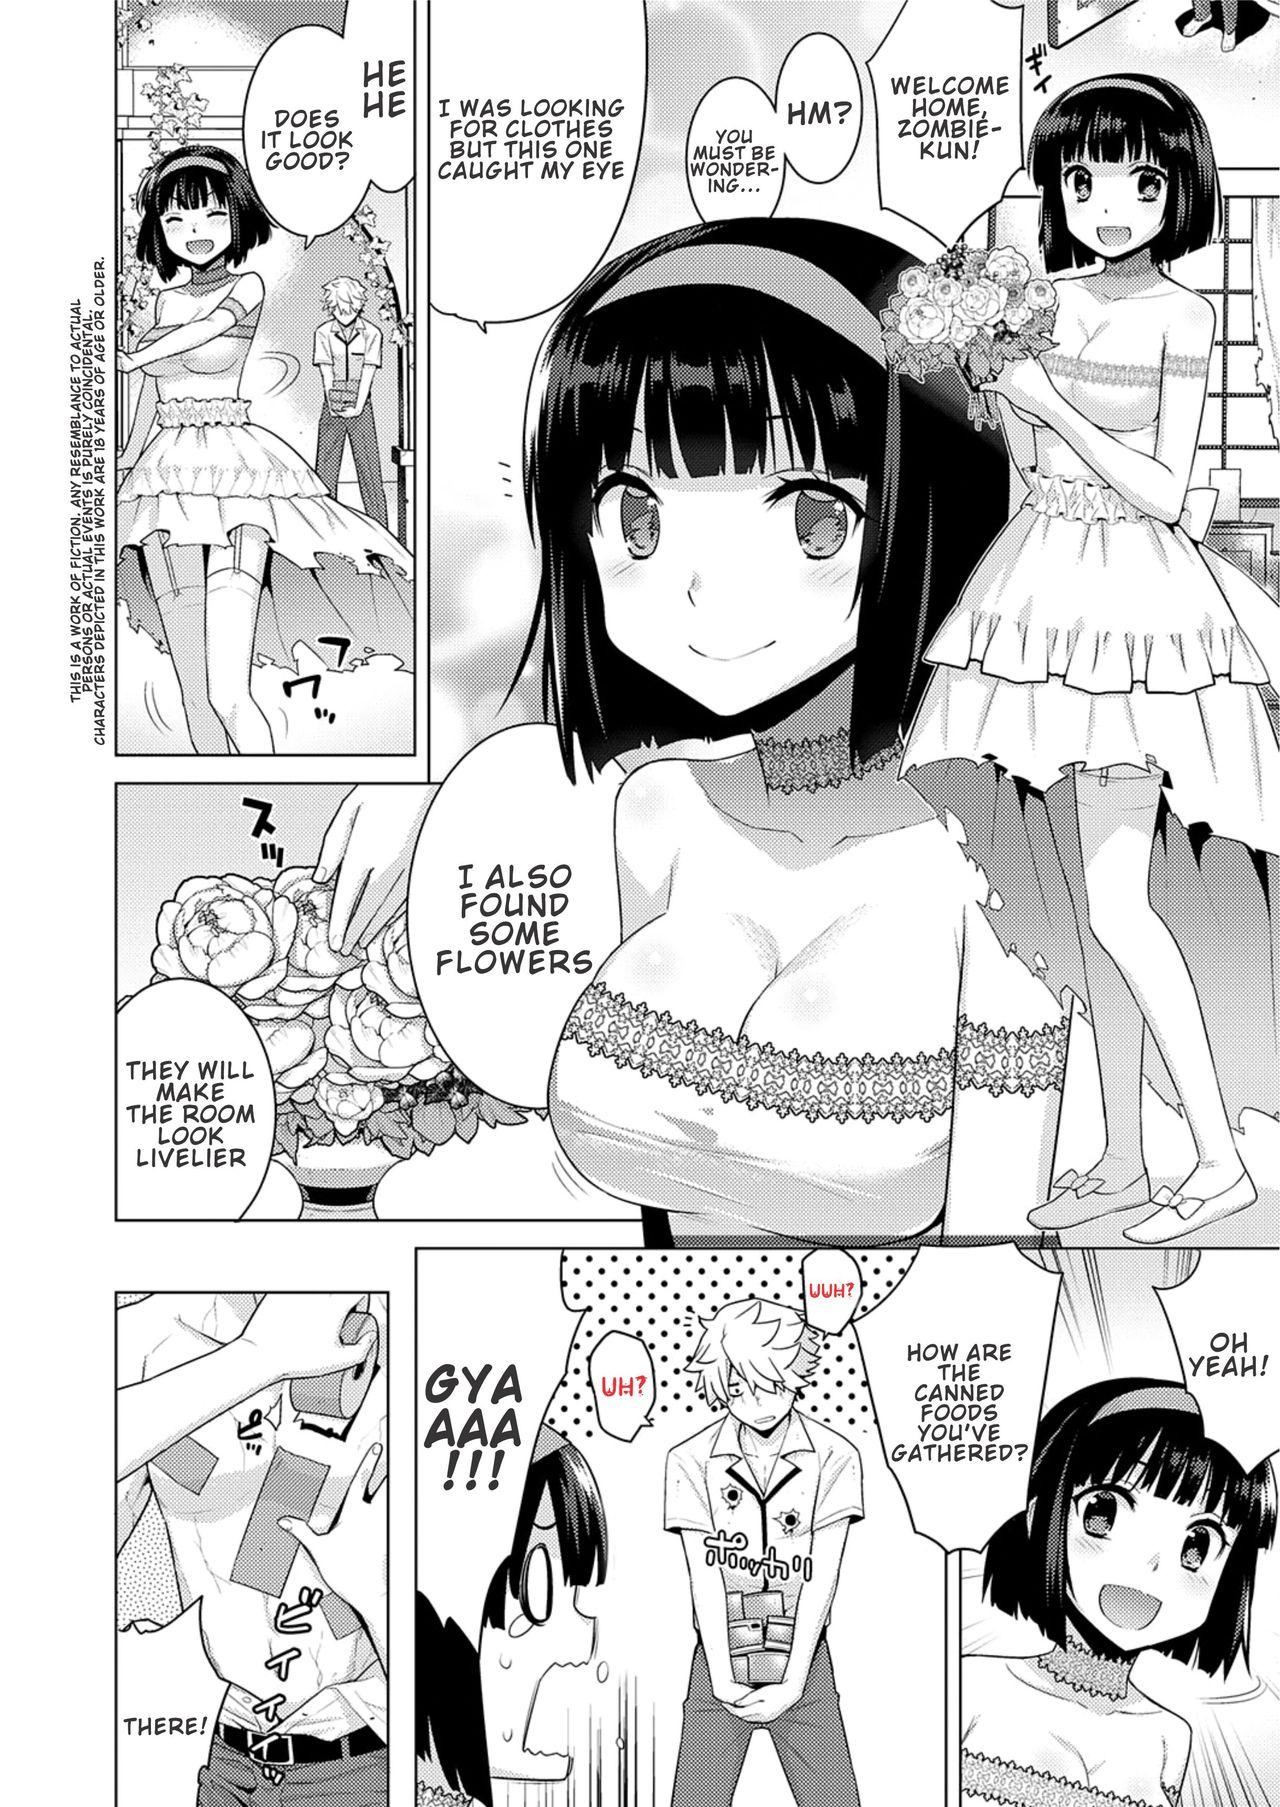 Edging Zombie no Hanayome | The Bride of Zombie Tribute - Page 2